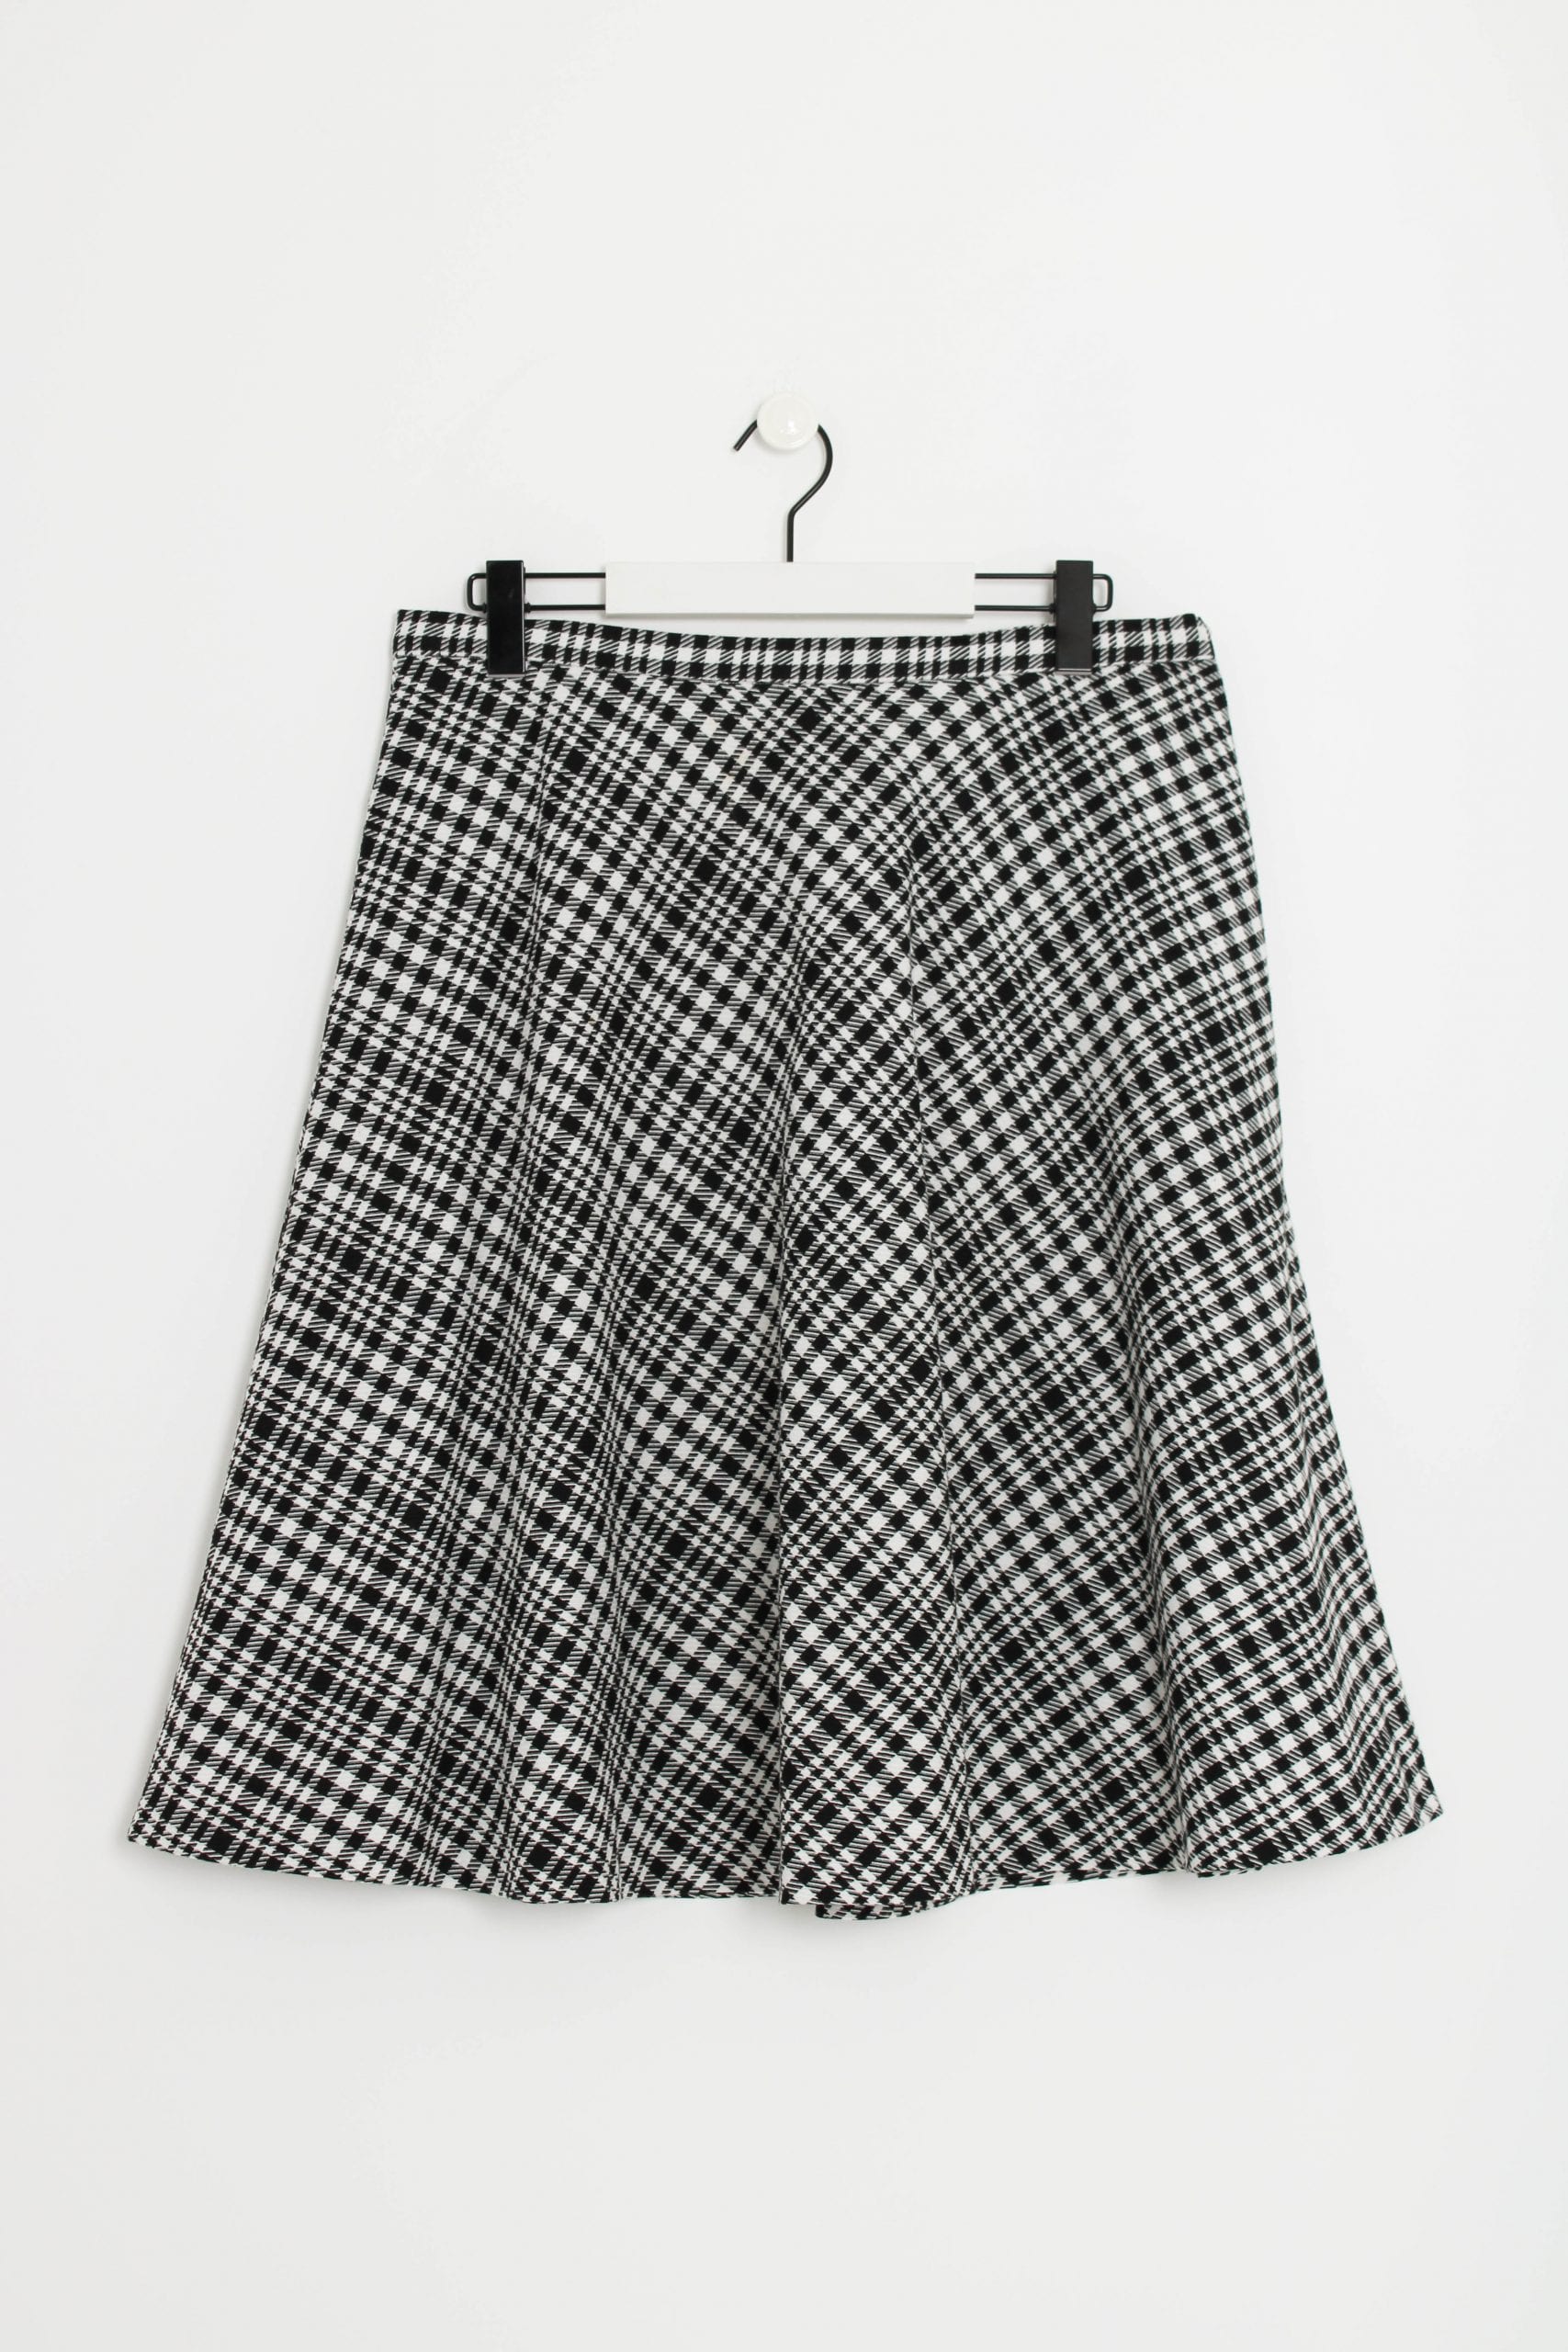 Black and white checked skirt - Swapology